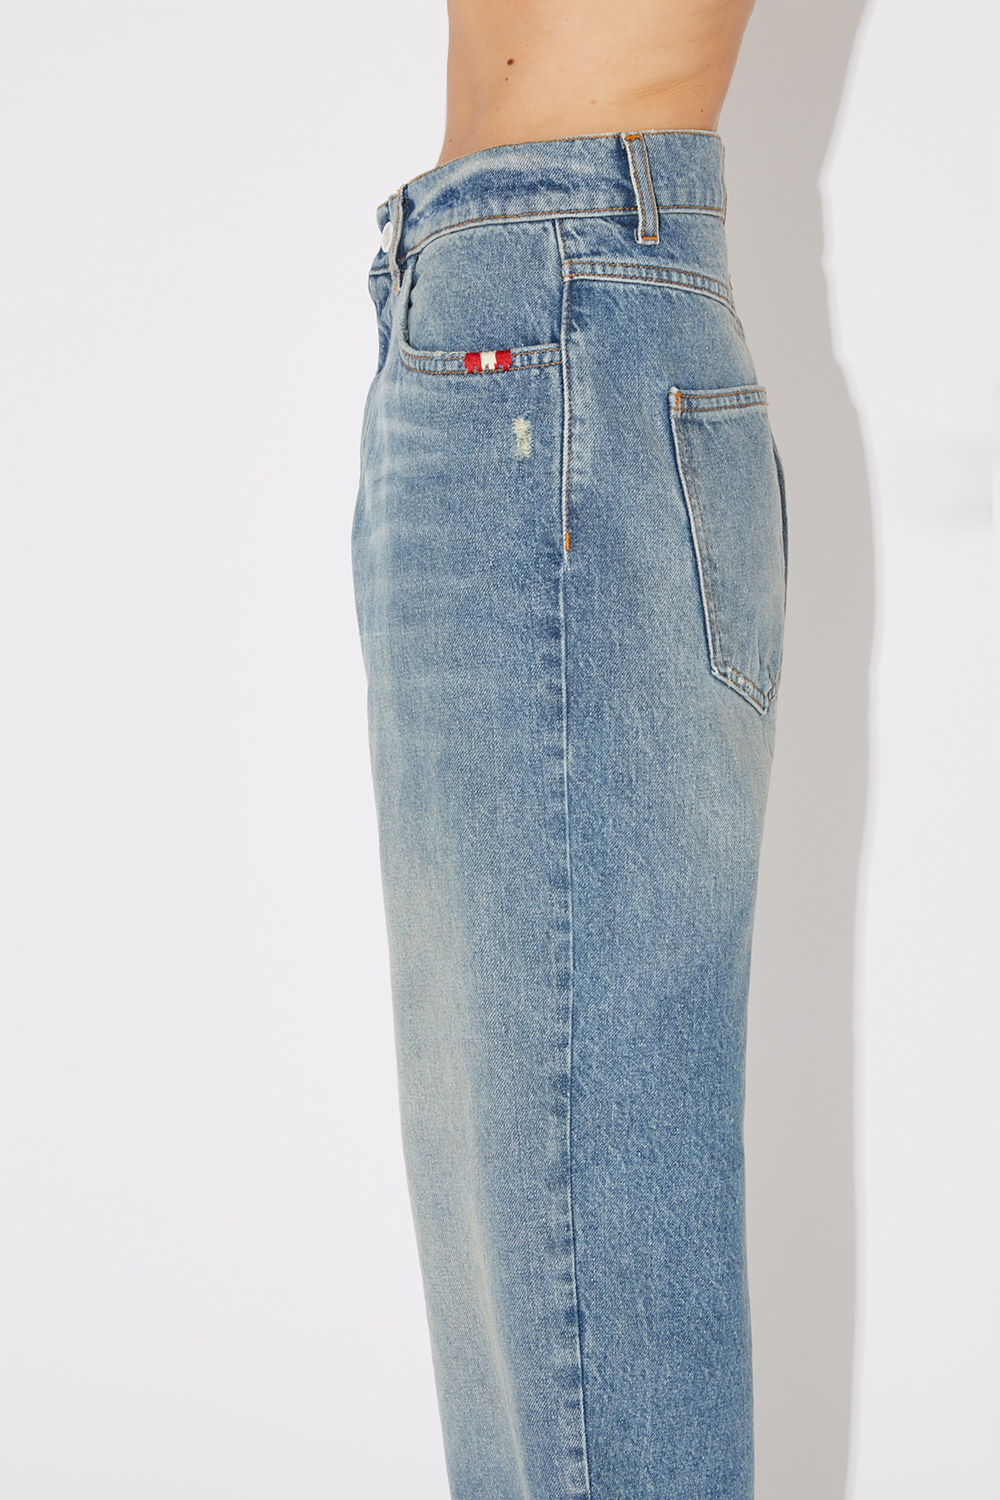 AMISH: JEANS BAGGY REAL VINTAGE